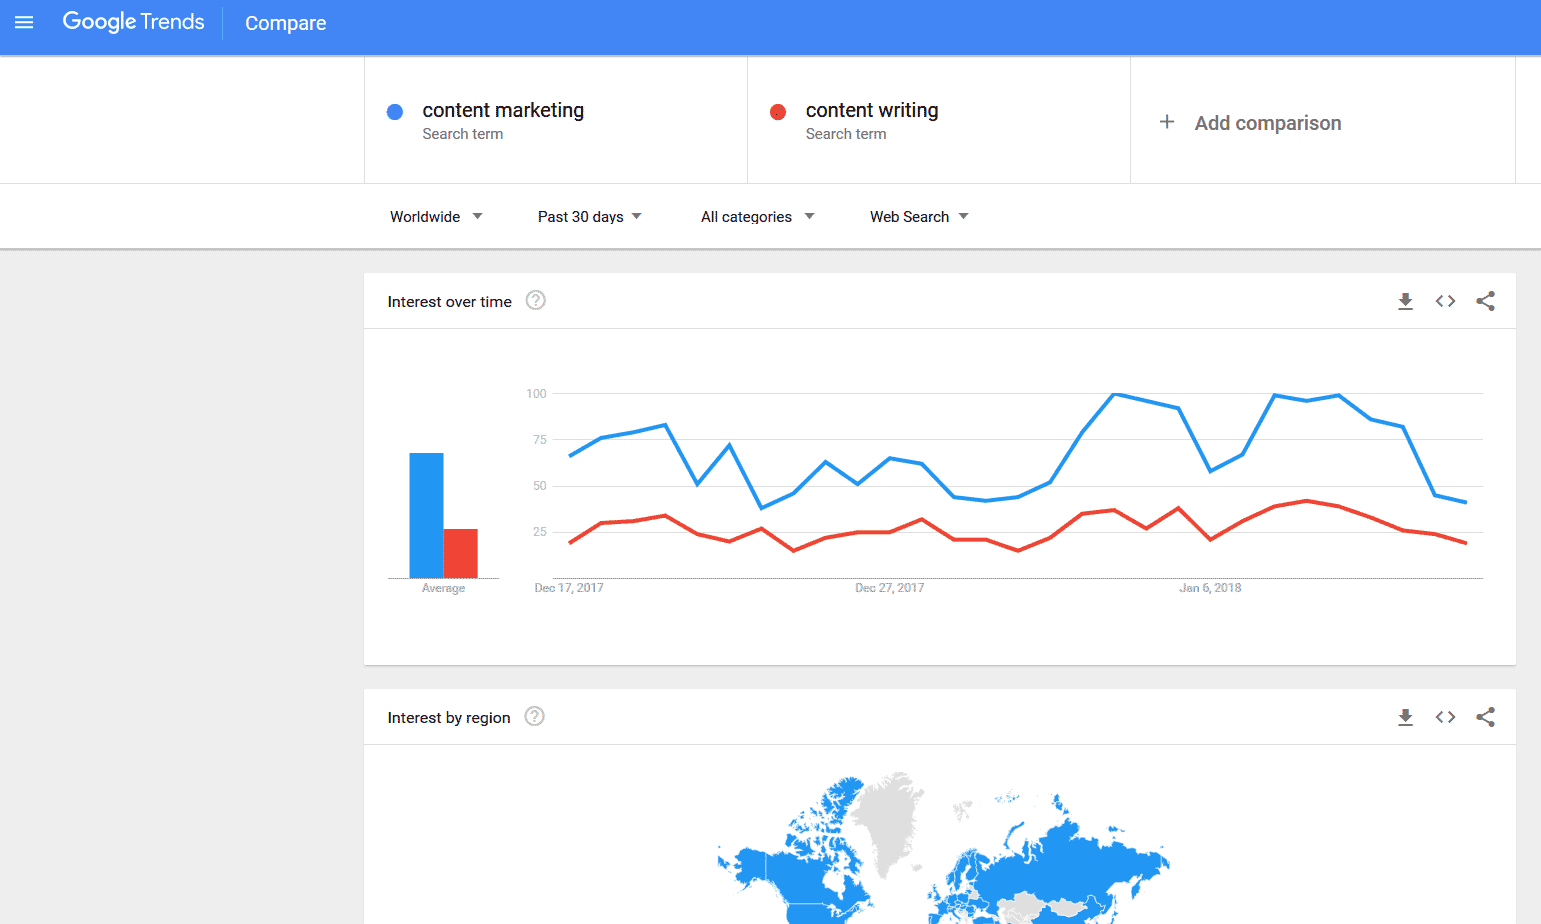 Google Trends for content marketing and content writing